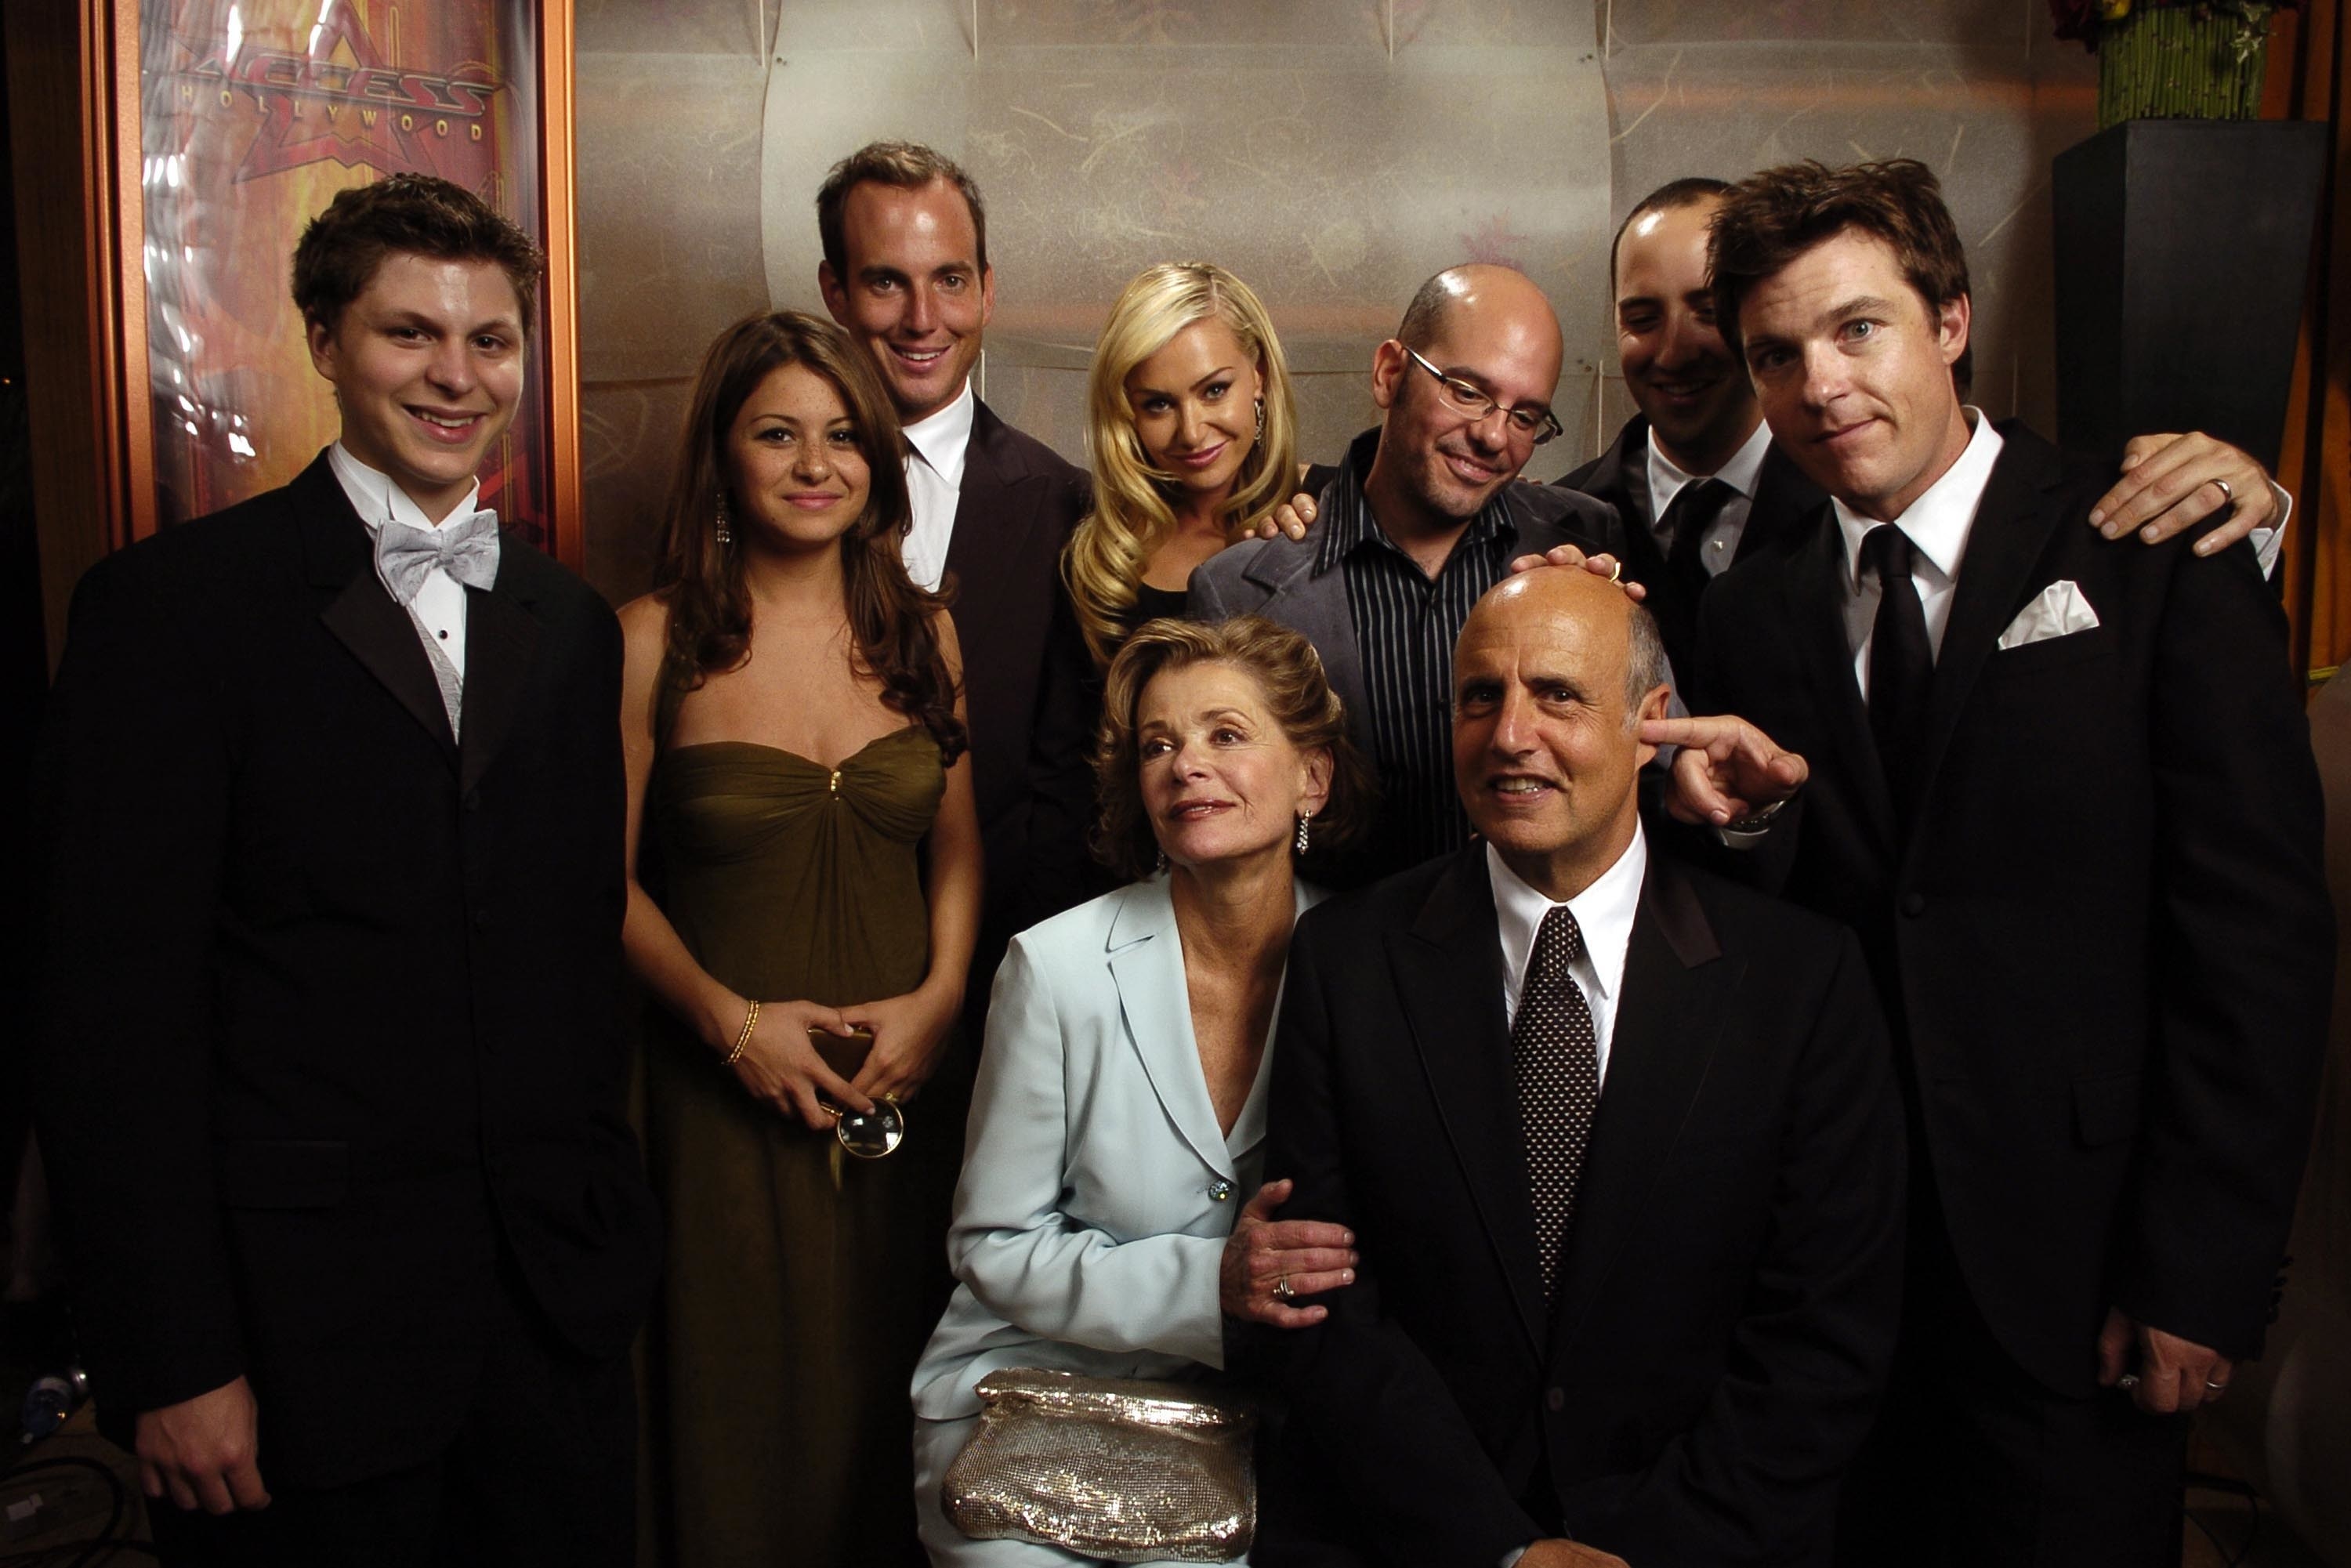 The cast of &quot;Arrested Development&quot; posing together